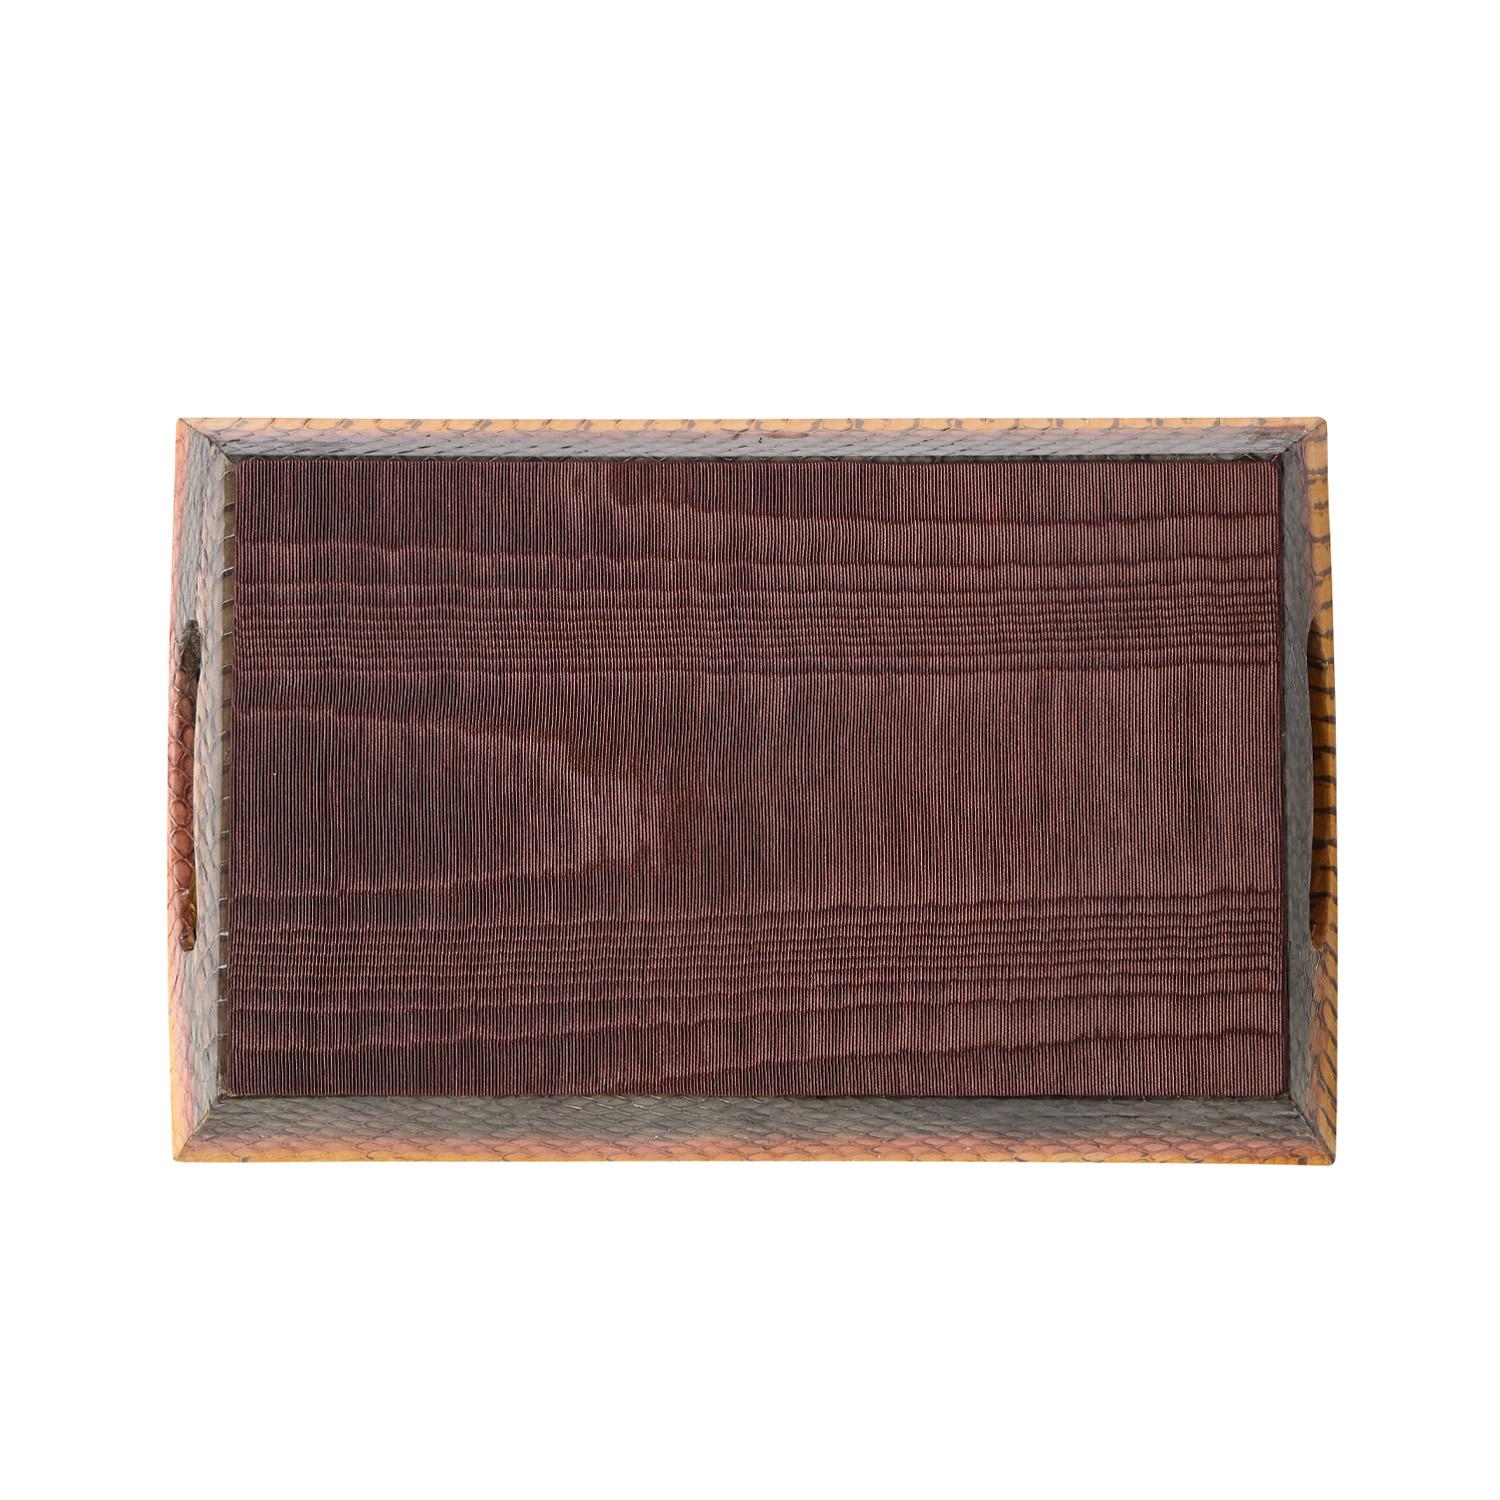 Lobel Originals Rectangular Tray in Gray, Plum and Sunflower Python, New In New Condition For Sale In New York, NY